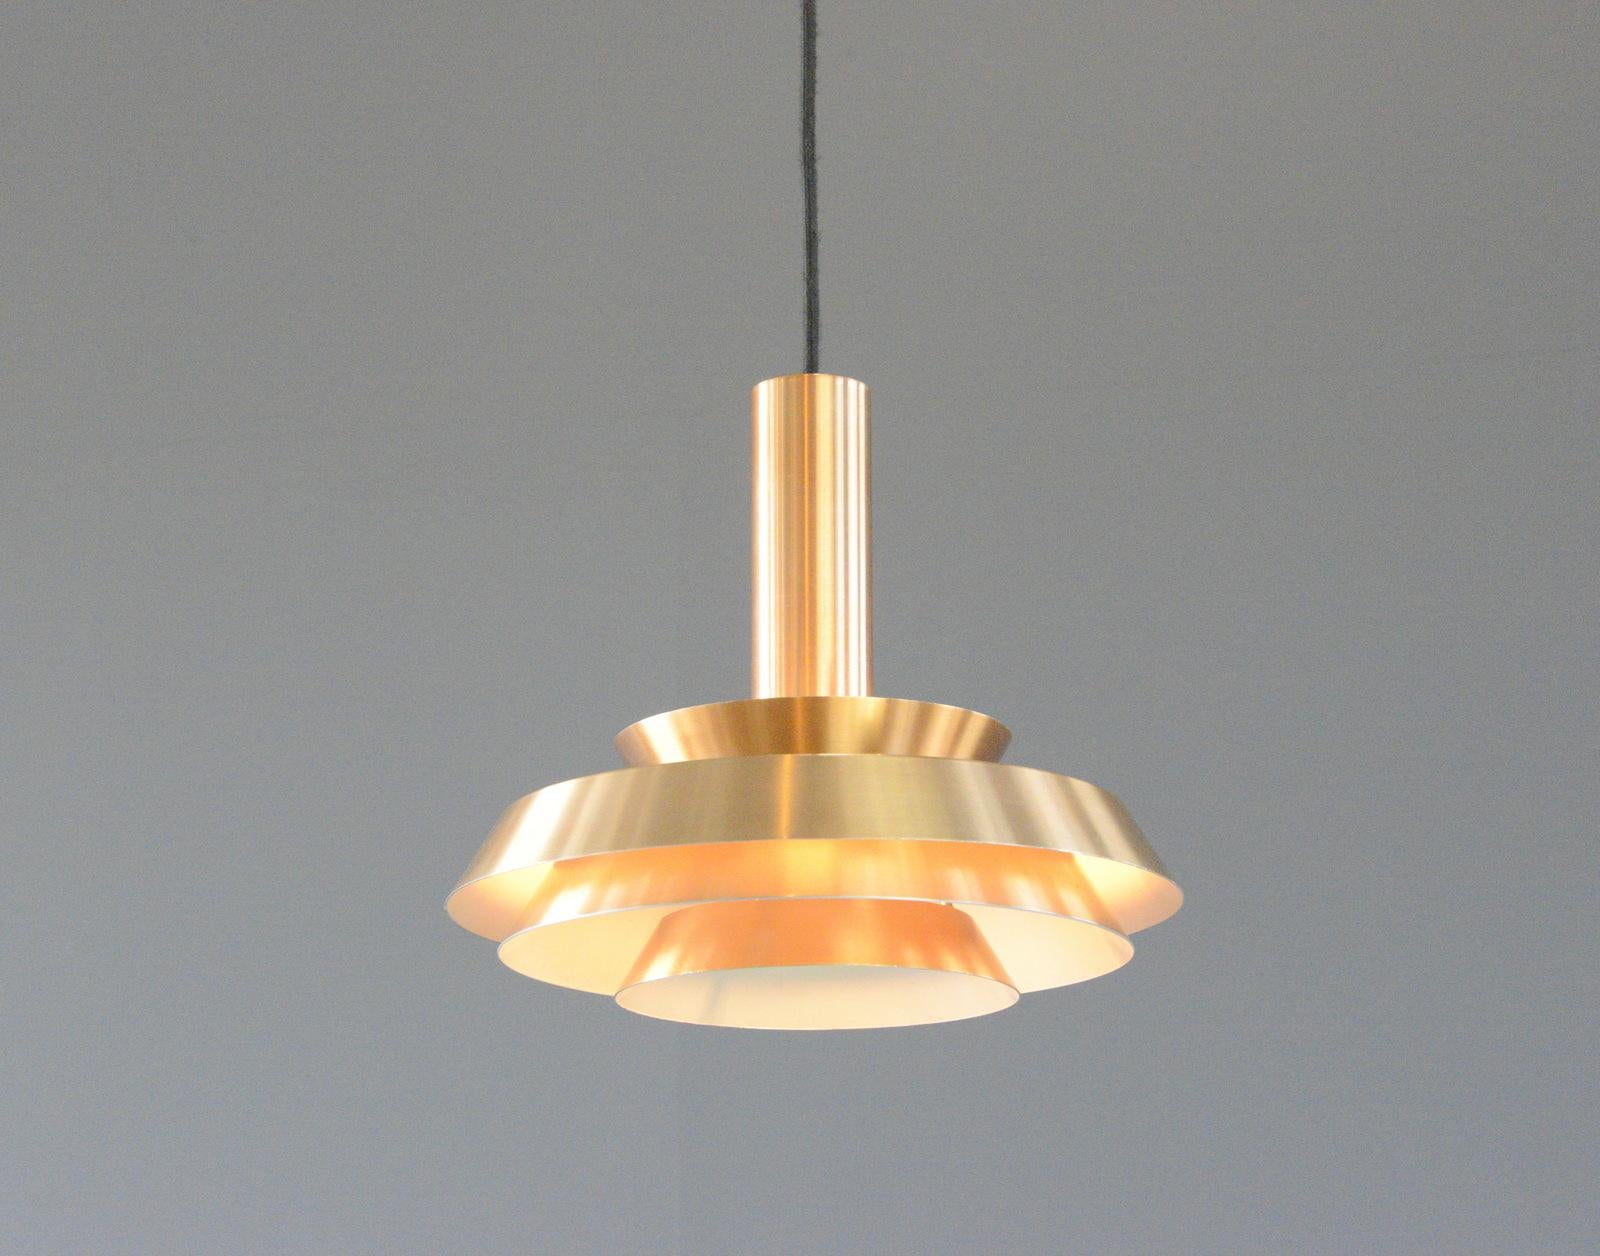 Midcentury Copper Pendant Light By VEB Metaldrucker Halle Circa 1970s

- Layered copper diffusers
- Takes E27 fitting bulbs
- Black fabric cable
- Comes with 100cm of cable
- Made by VEB Metaldrucker, Halle
- Model P612
- East German ~